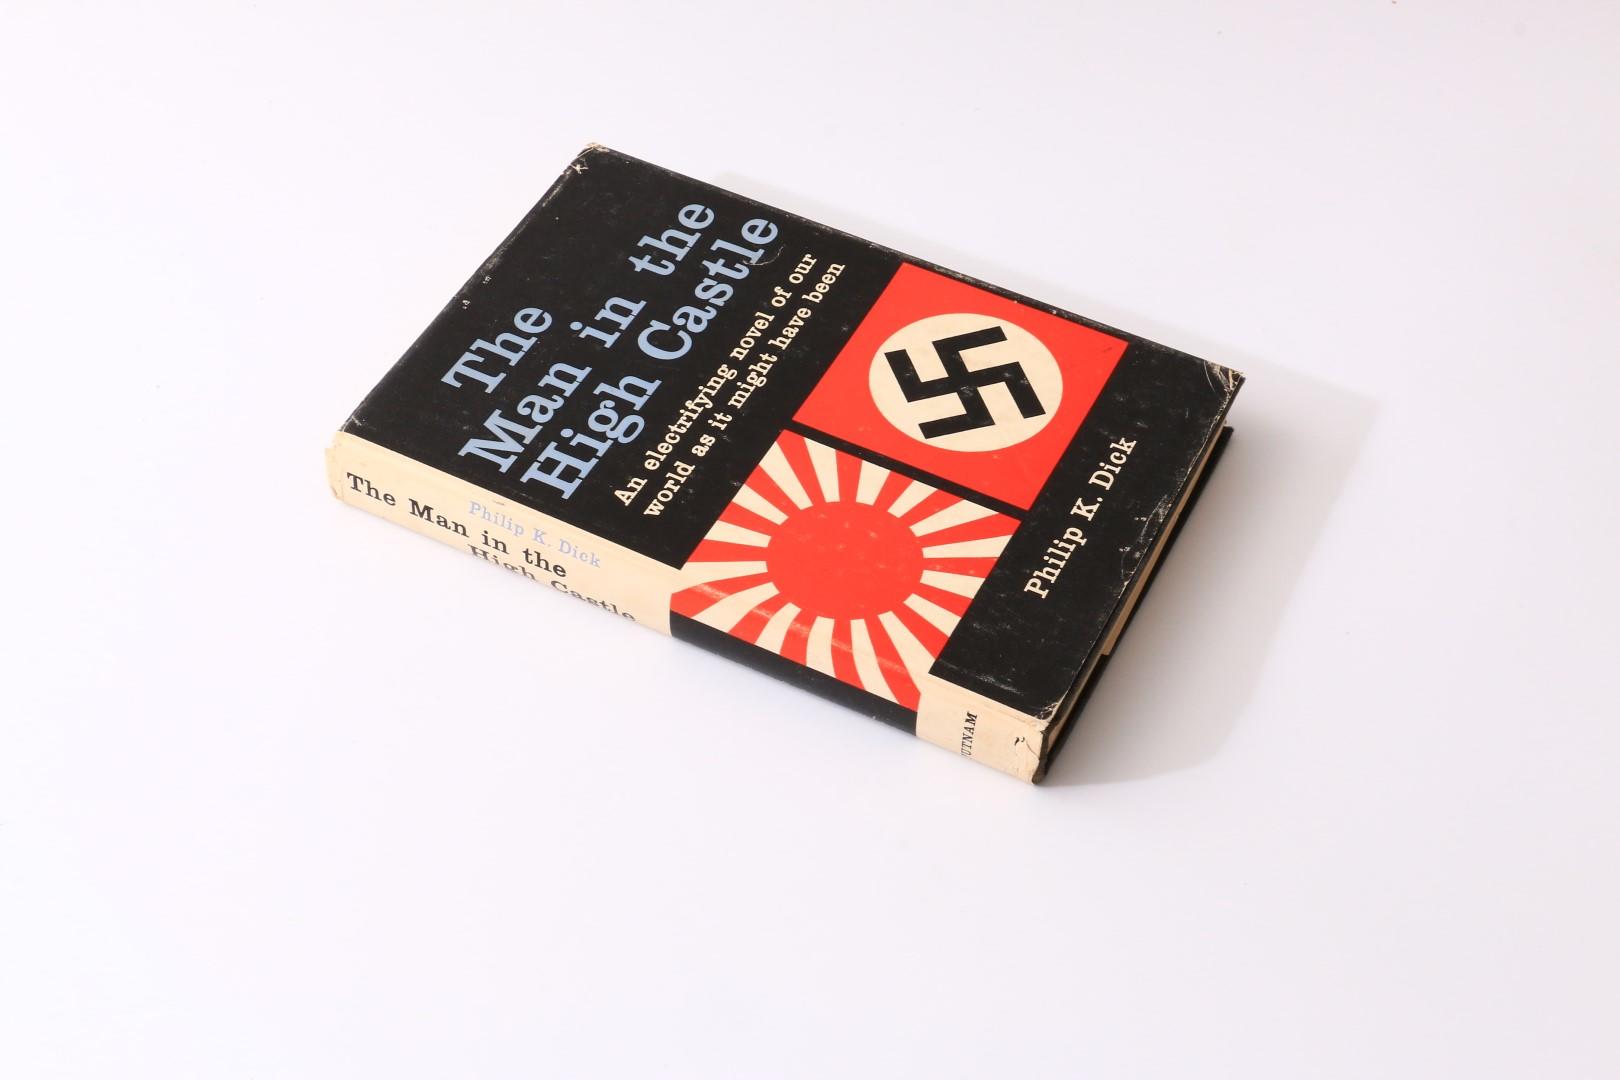 Philip K. Dick - The Man in the High Castle - Putnam's, 1962, First Edition.